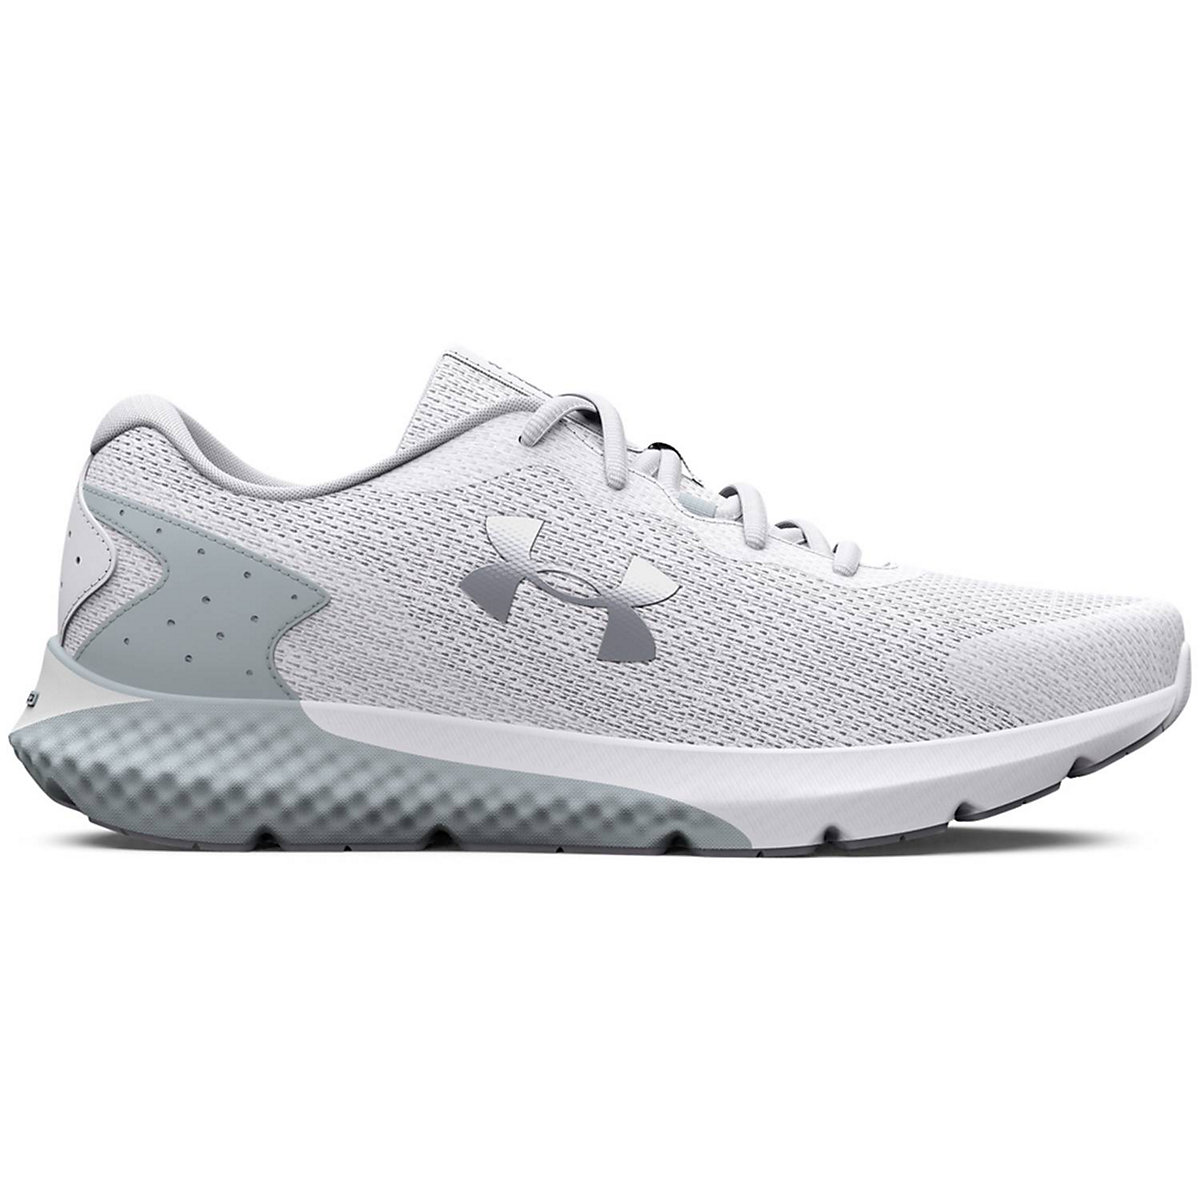 Under Armour Charged Rogue 3 Knit Slip-On-Sneaker weiß